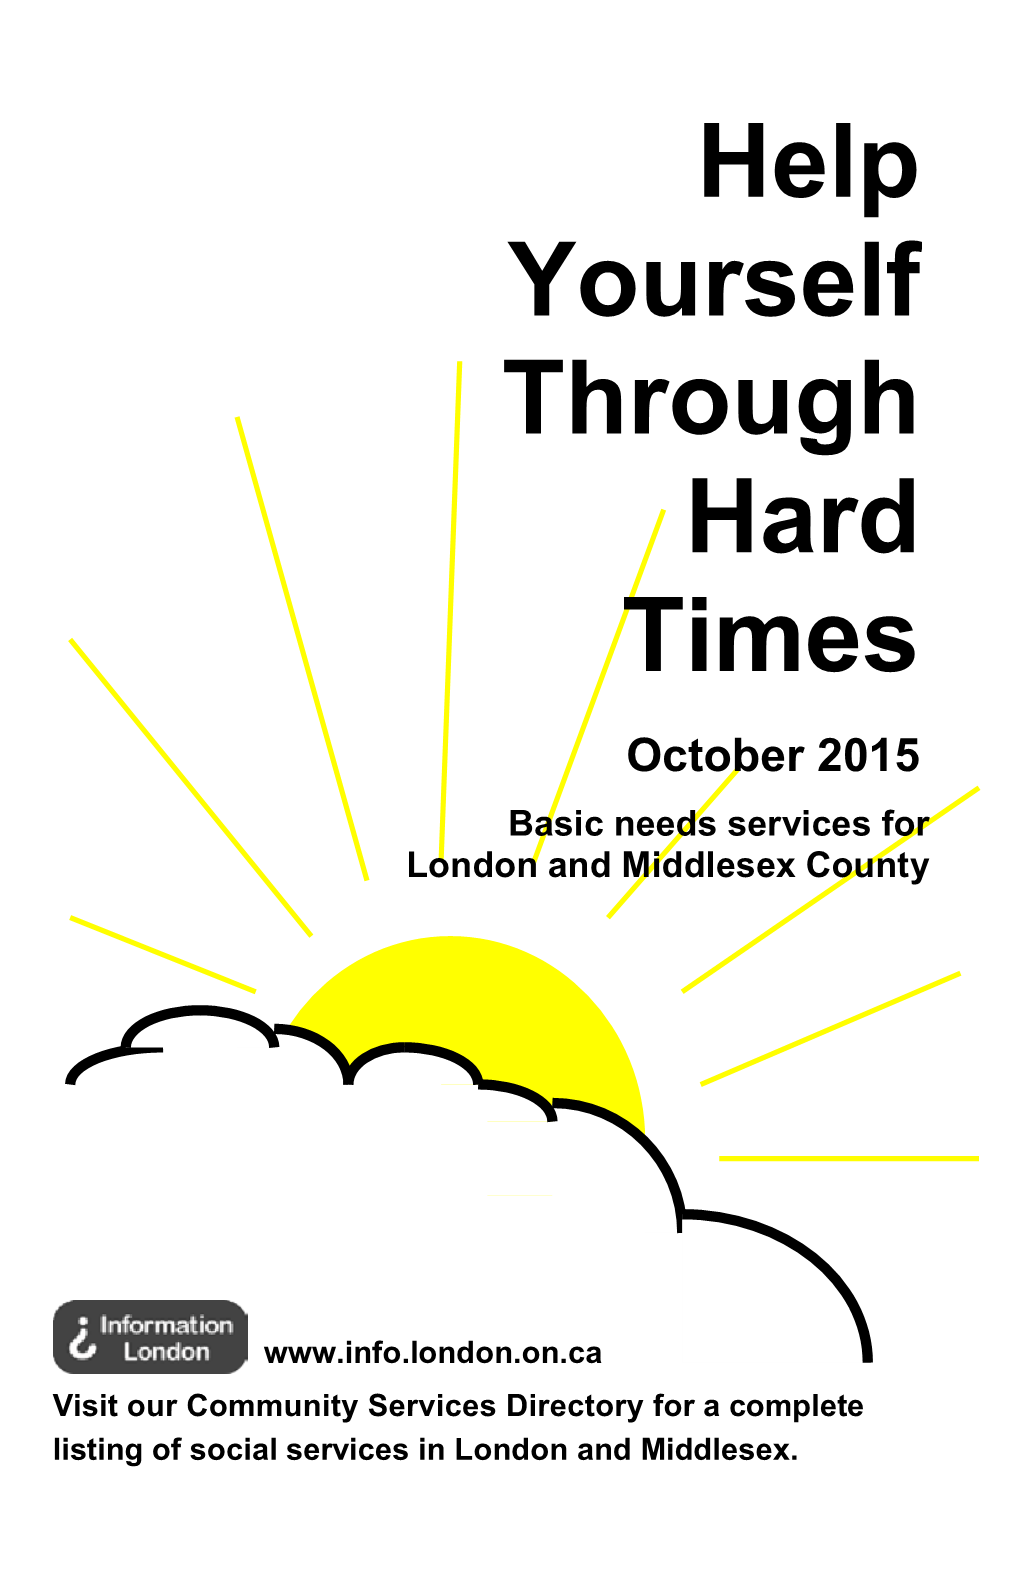 Help Yourself Through Hard Times October 2015 Basic Needs Services for London and Middlesex County